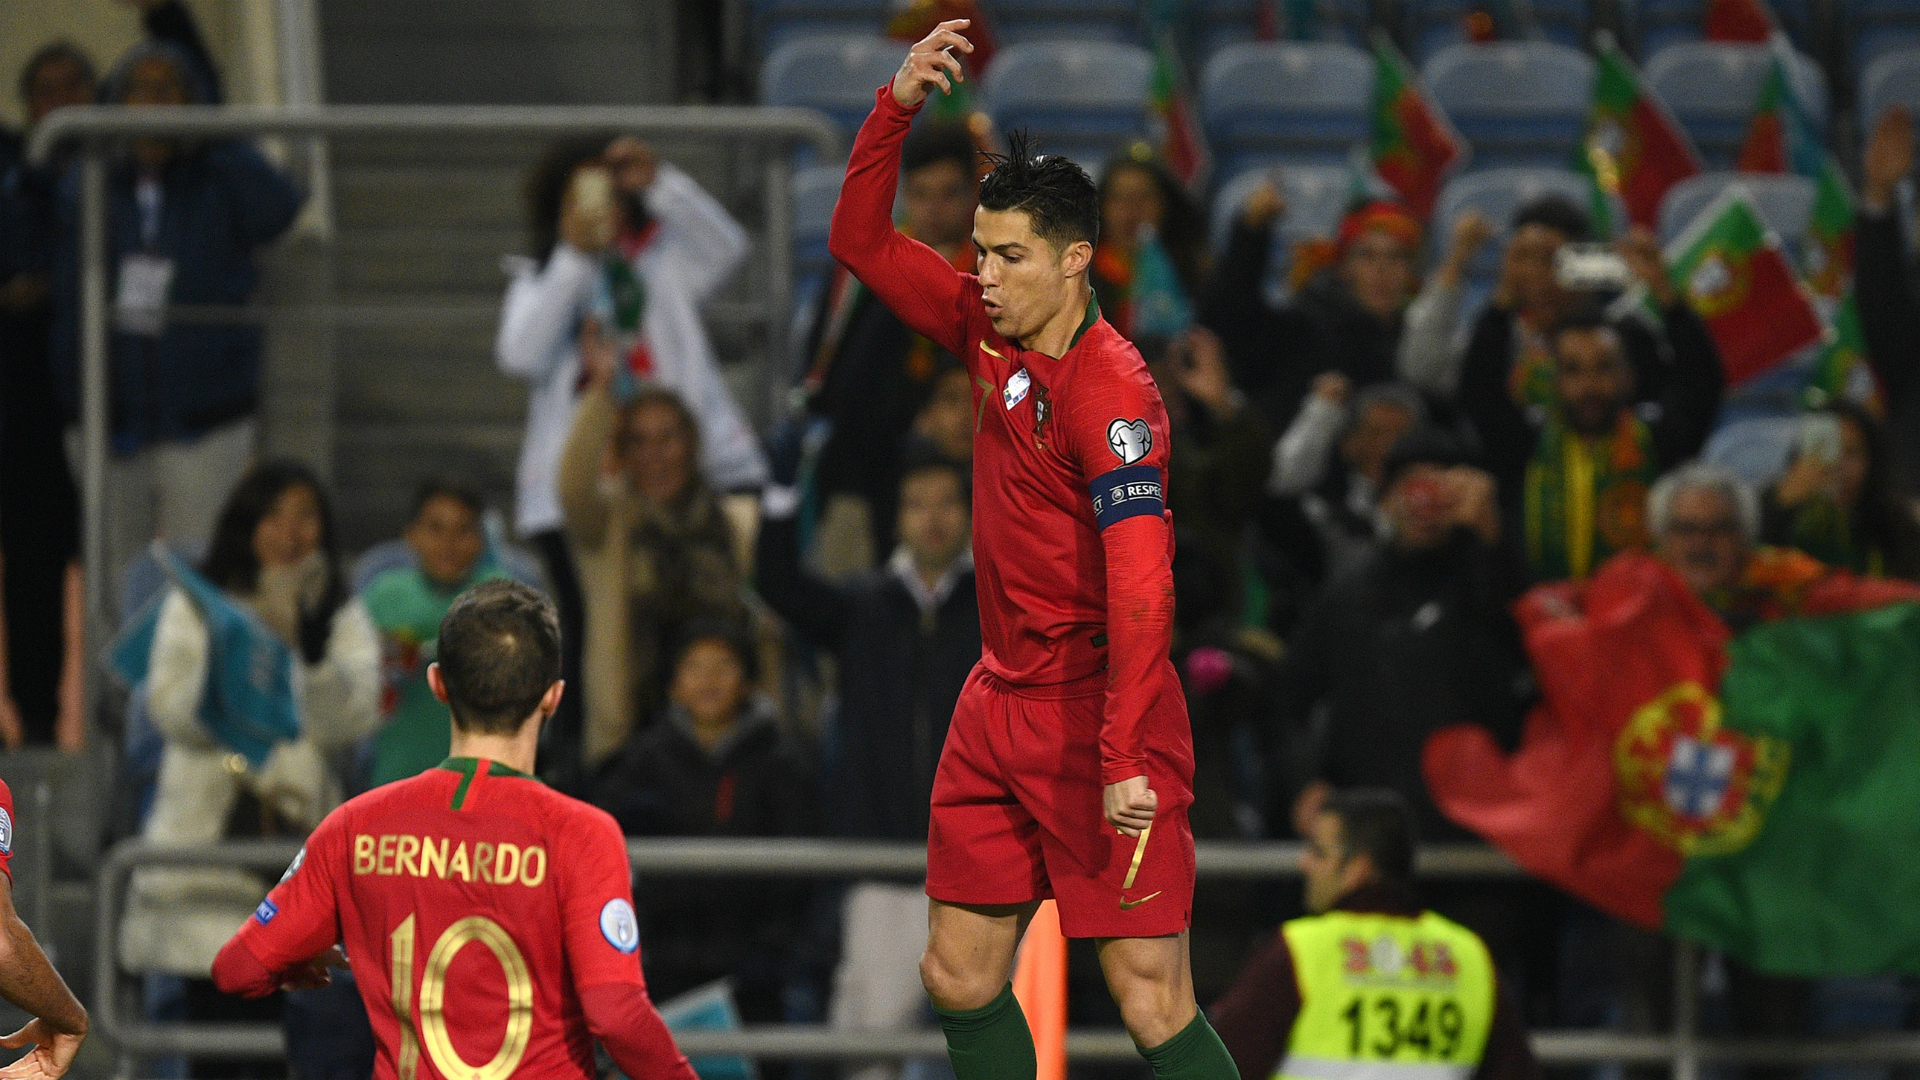 Portugal 6-0 Lithuania: Ronaldo scores hat-trick as holders close in on Euro 2020 spot